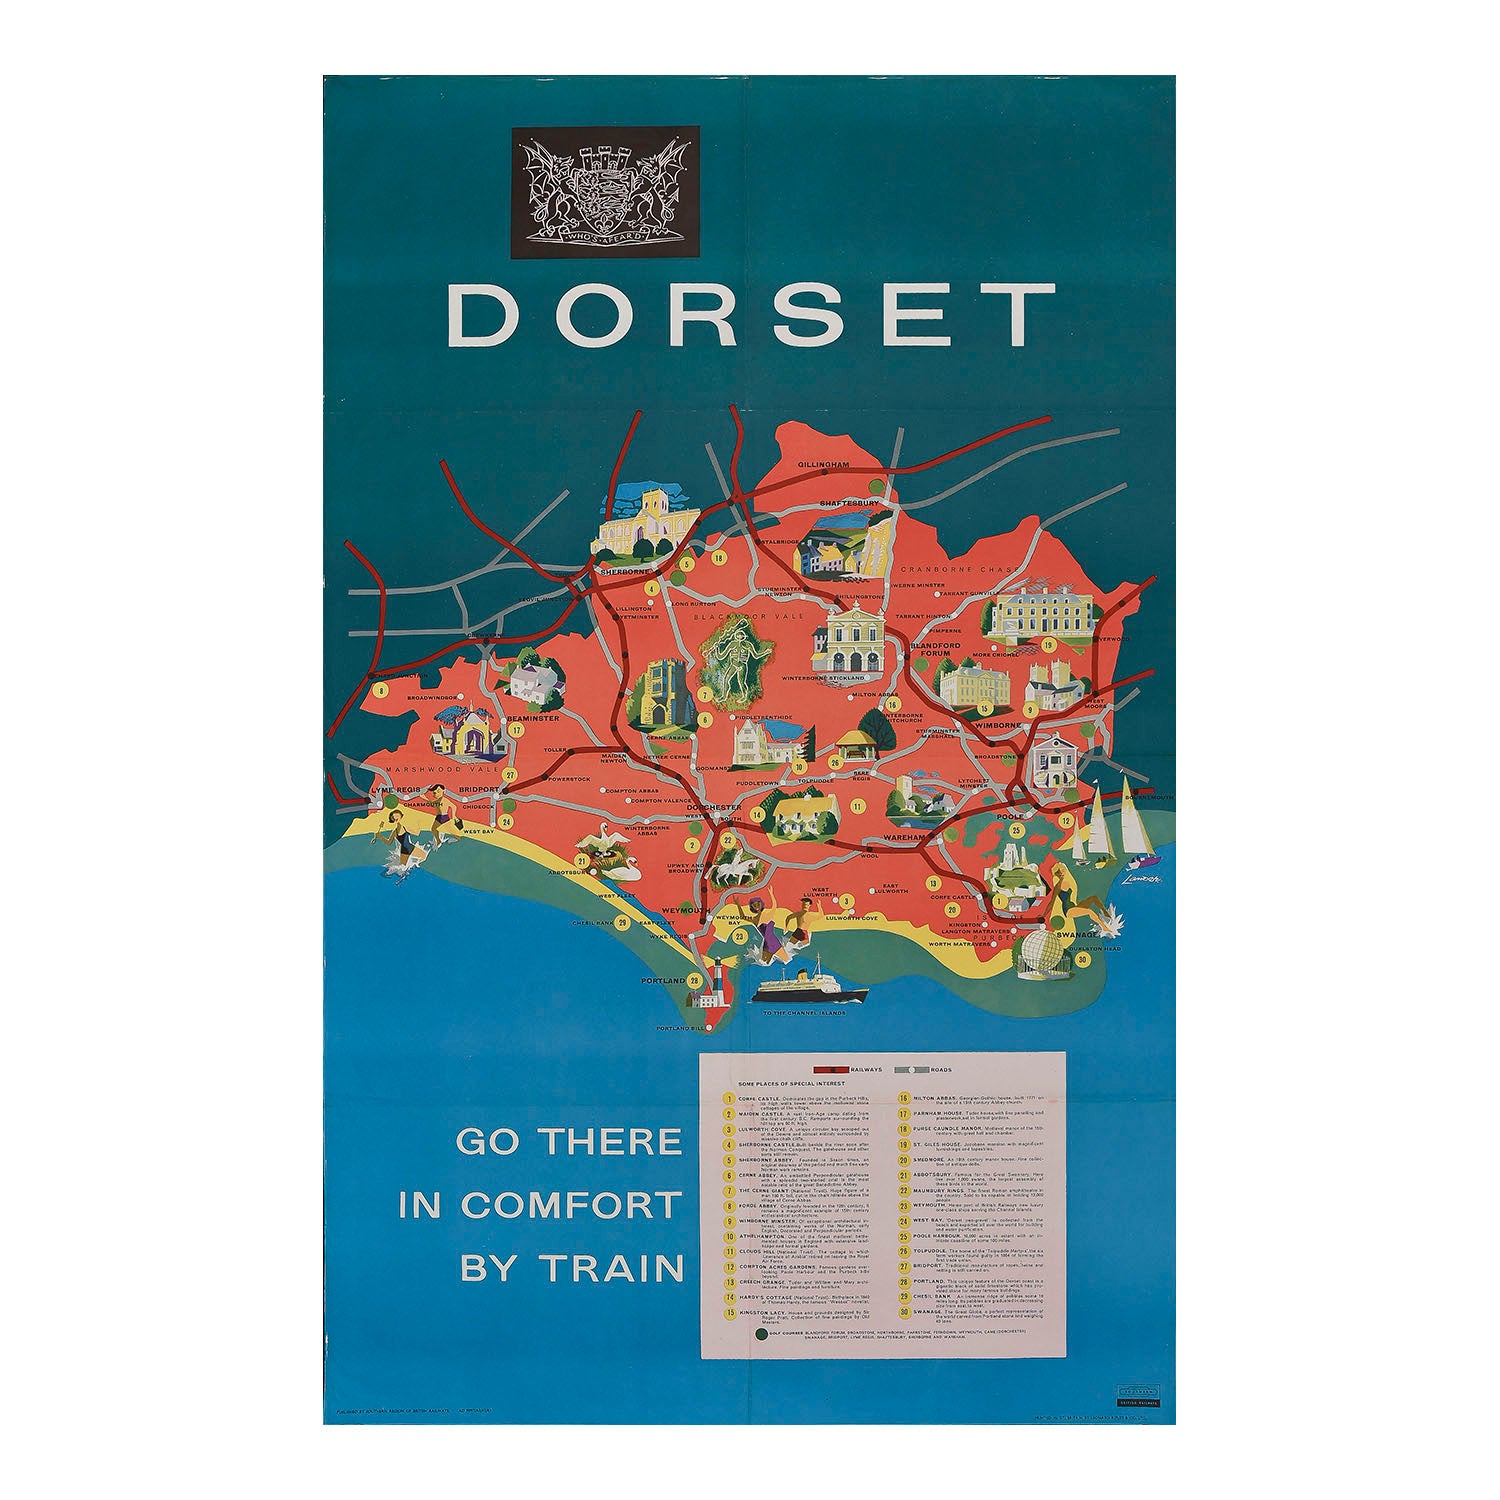 original, decorative poster map of Dorset designed by John Lander for British Railways, 1962. The charming design features vignettes of places to visit, including Lyme Regis, Weymouth, Portland, Lulworth Cove, Swanage, Corfe Castle, and Poole.